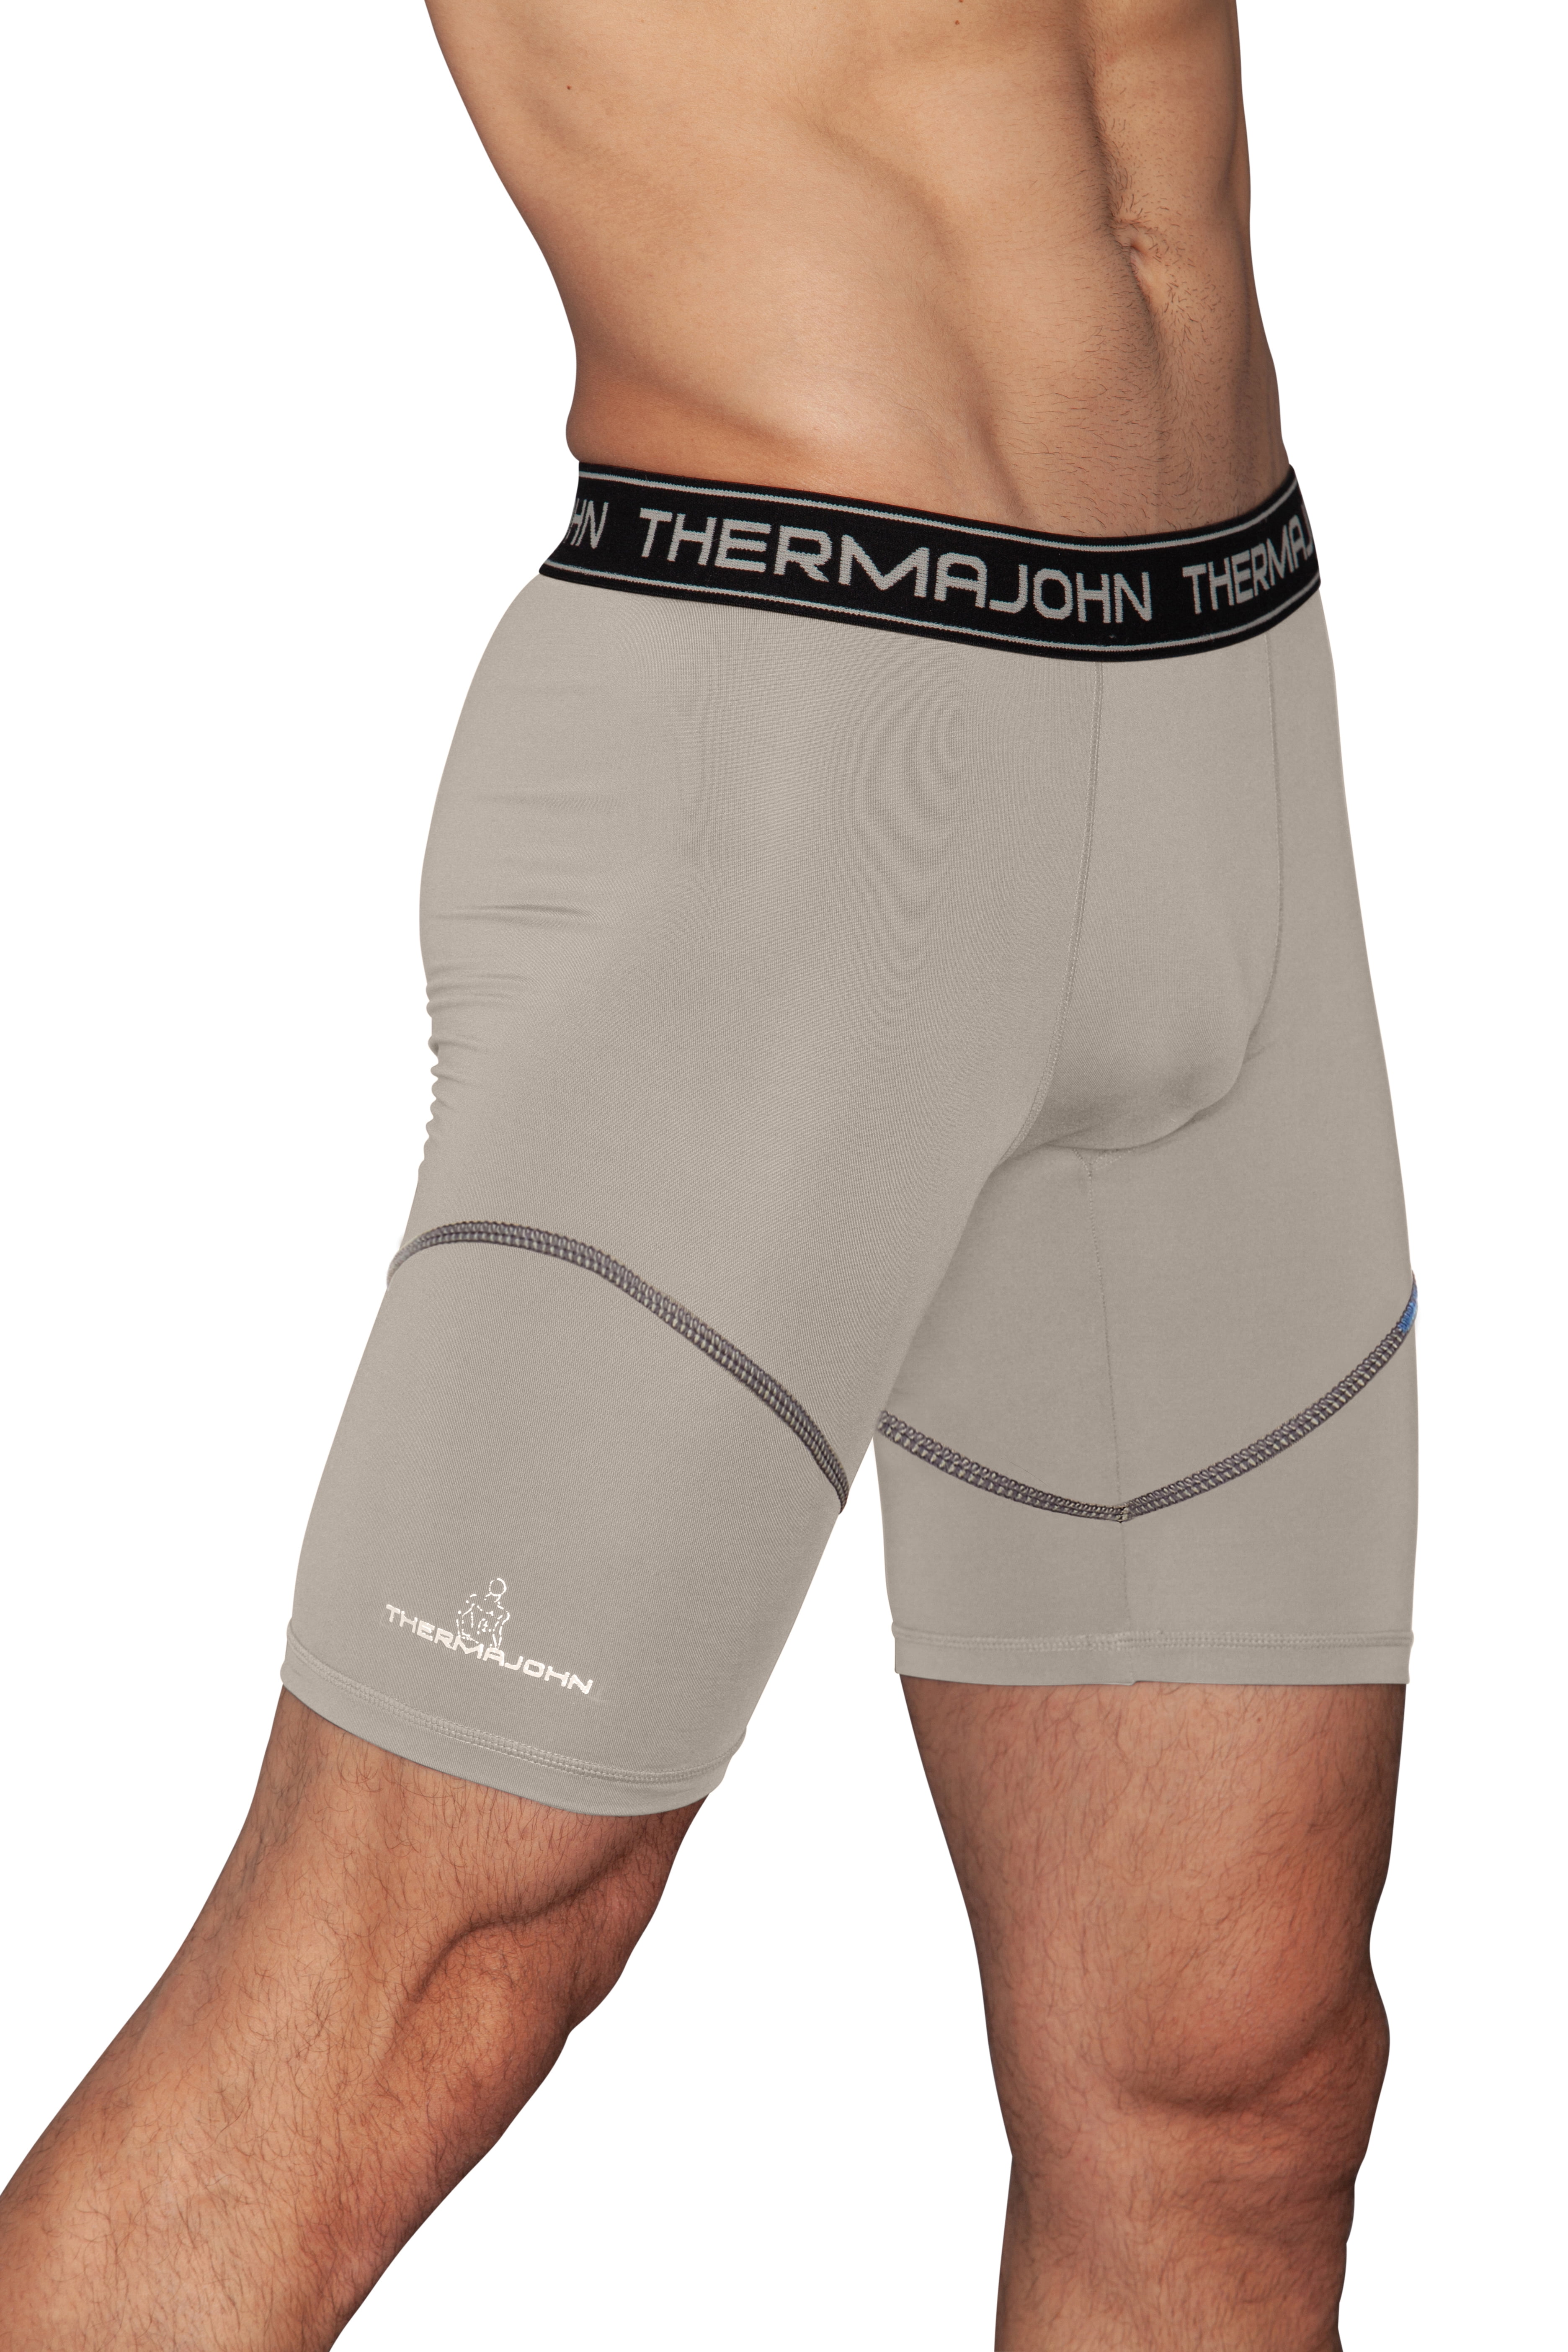 Thermajohn Men's Compression Shorts Underwear Cool & Quick Dry Athletic Shorts 